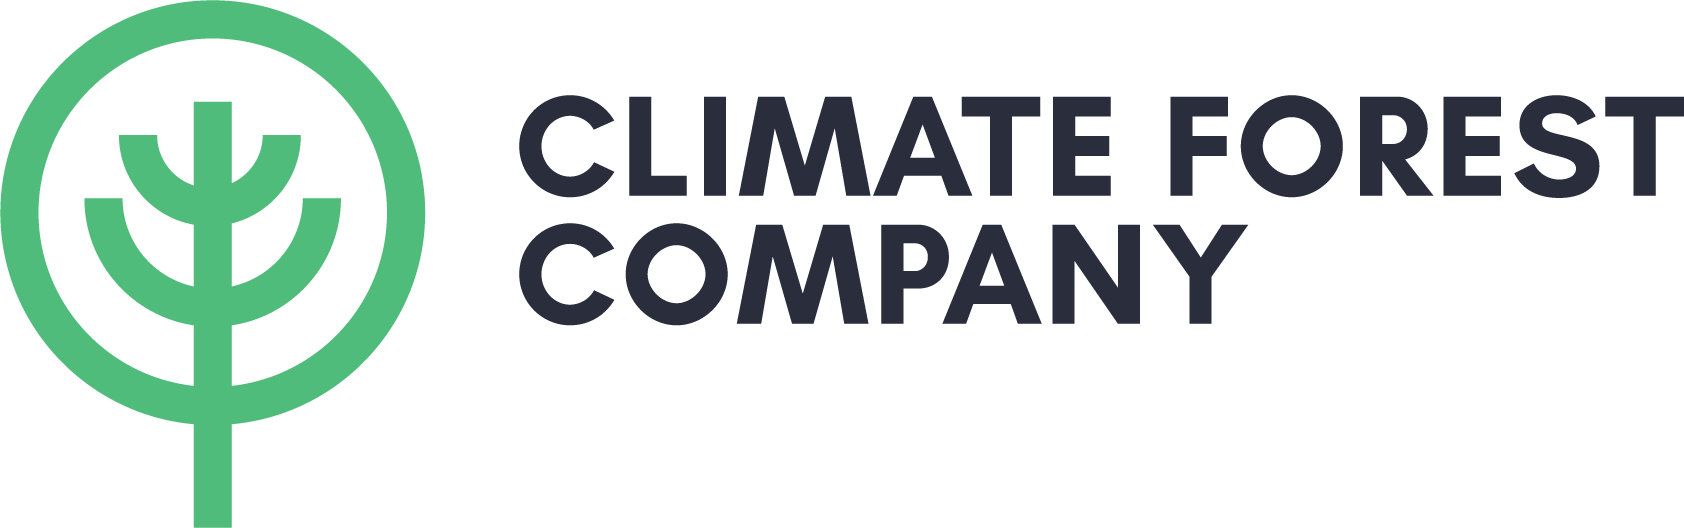 Climate Forest Company Logo